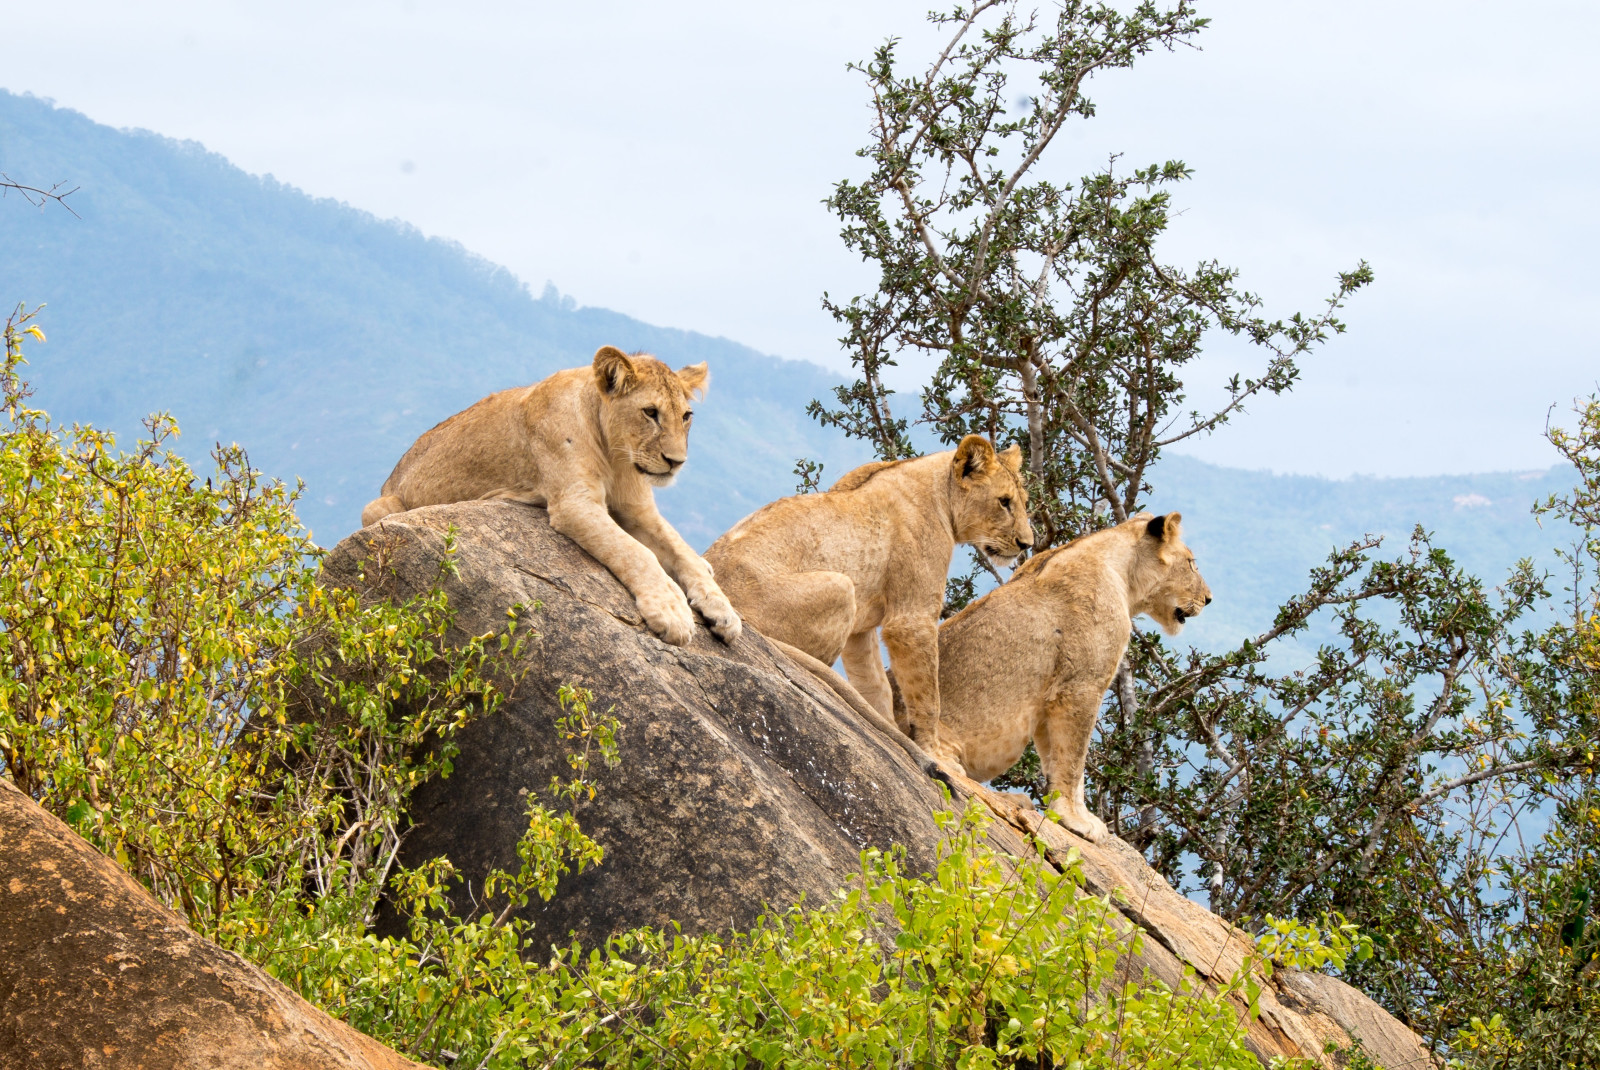 Three lions sitting on a rock next to trees on a sunny day in Tsavo National Park